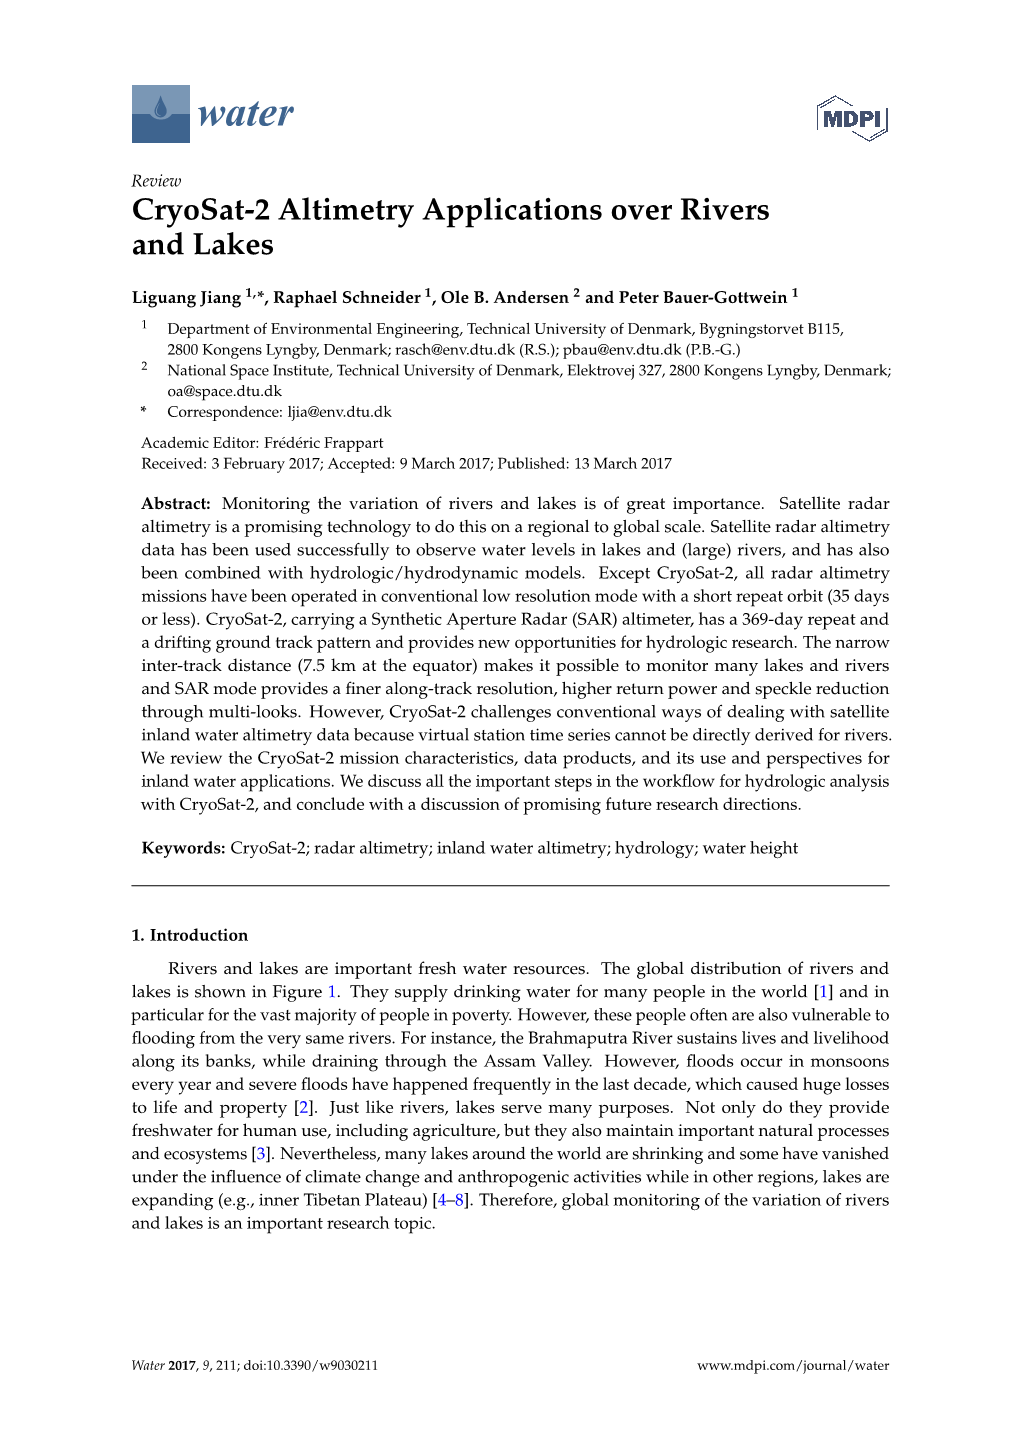 Cryosat-2 Altimetry Applications Over Rivers and Lakes